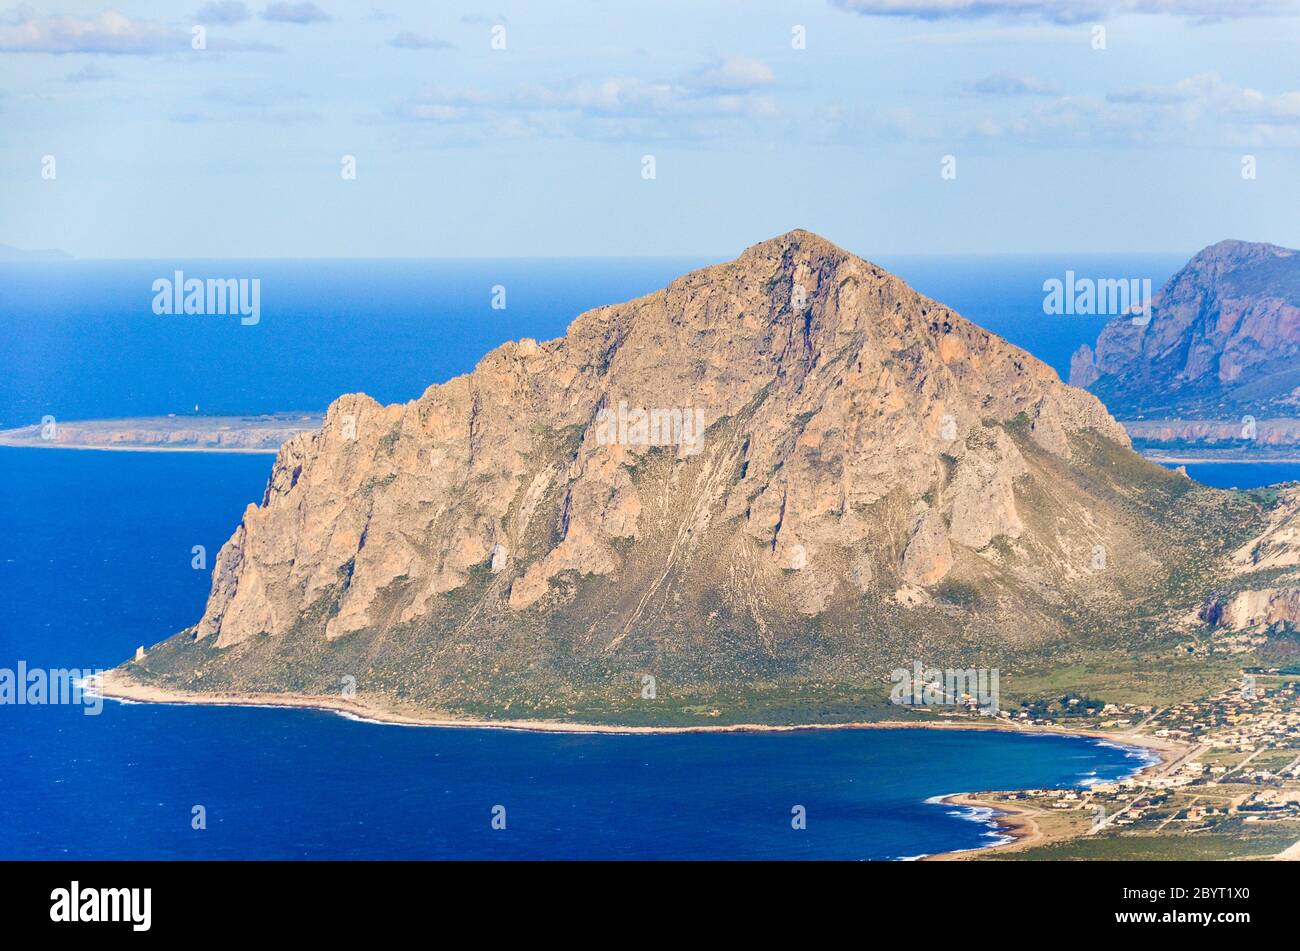 Aerial views of Trapani from Erice, Sicily, Italy, in winter (December) Stock Photo